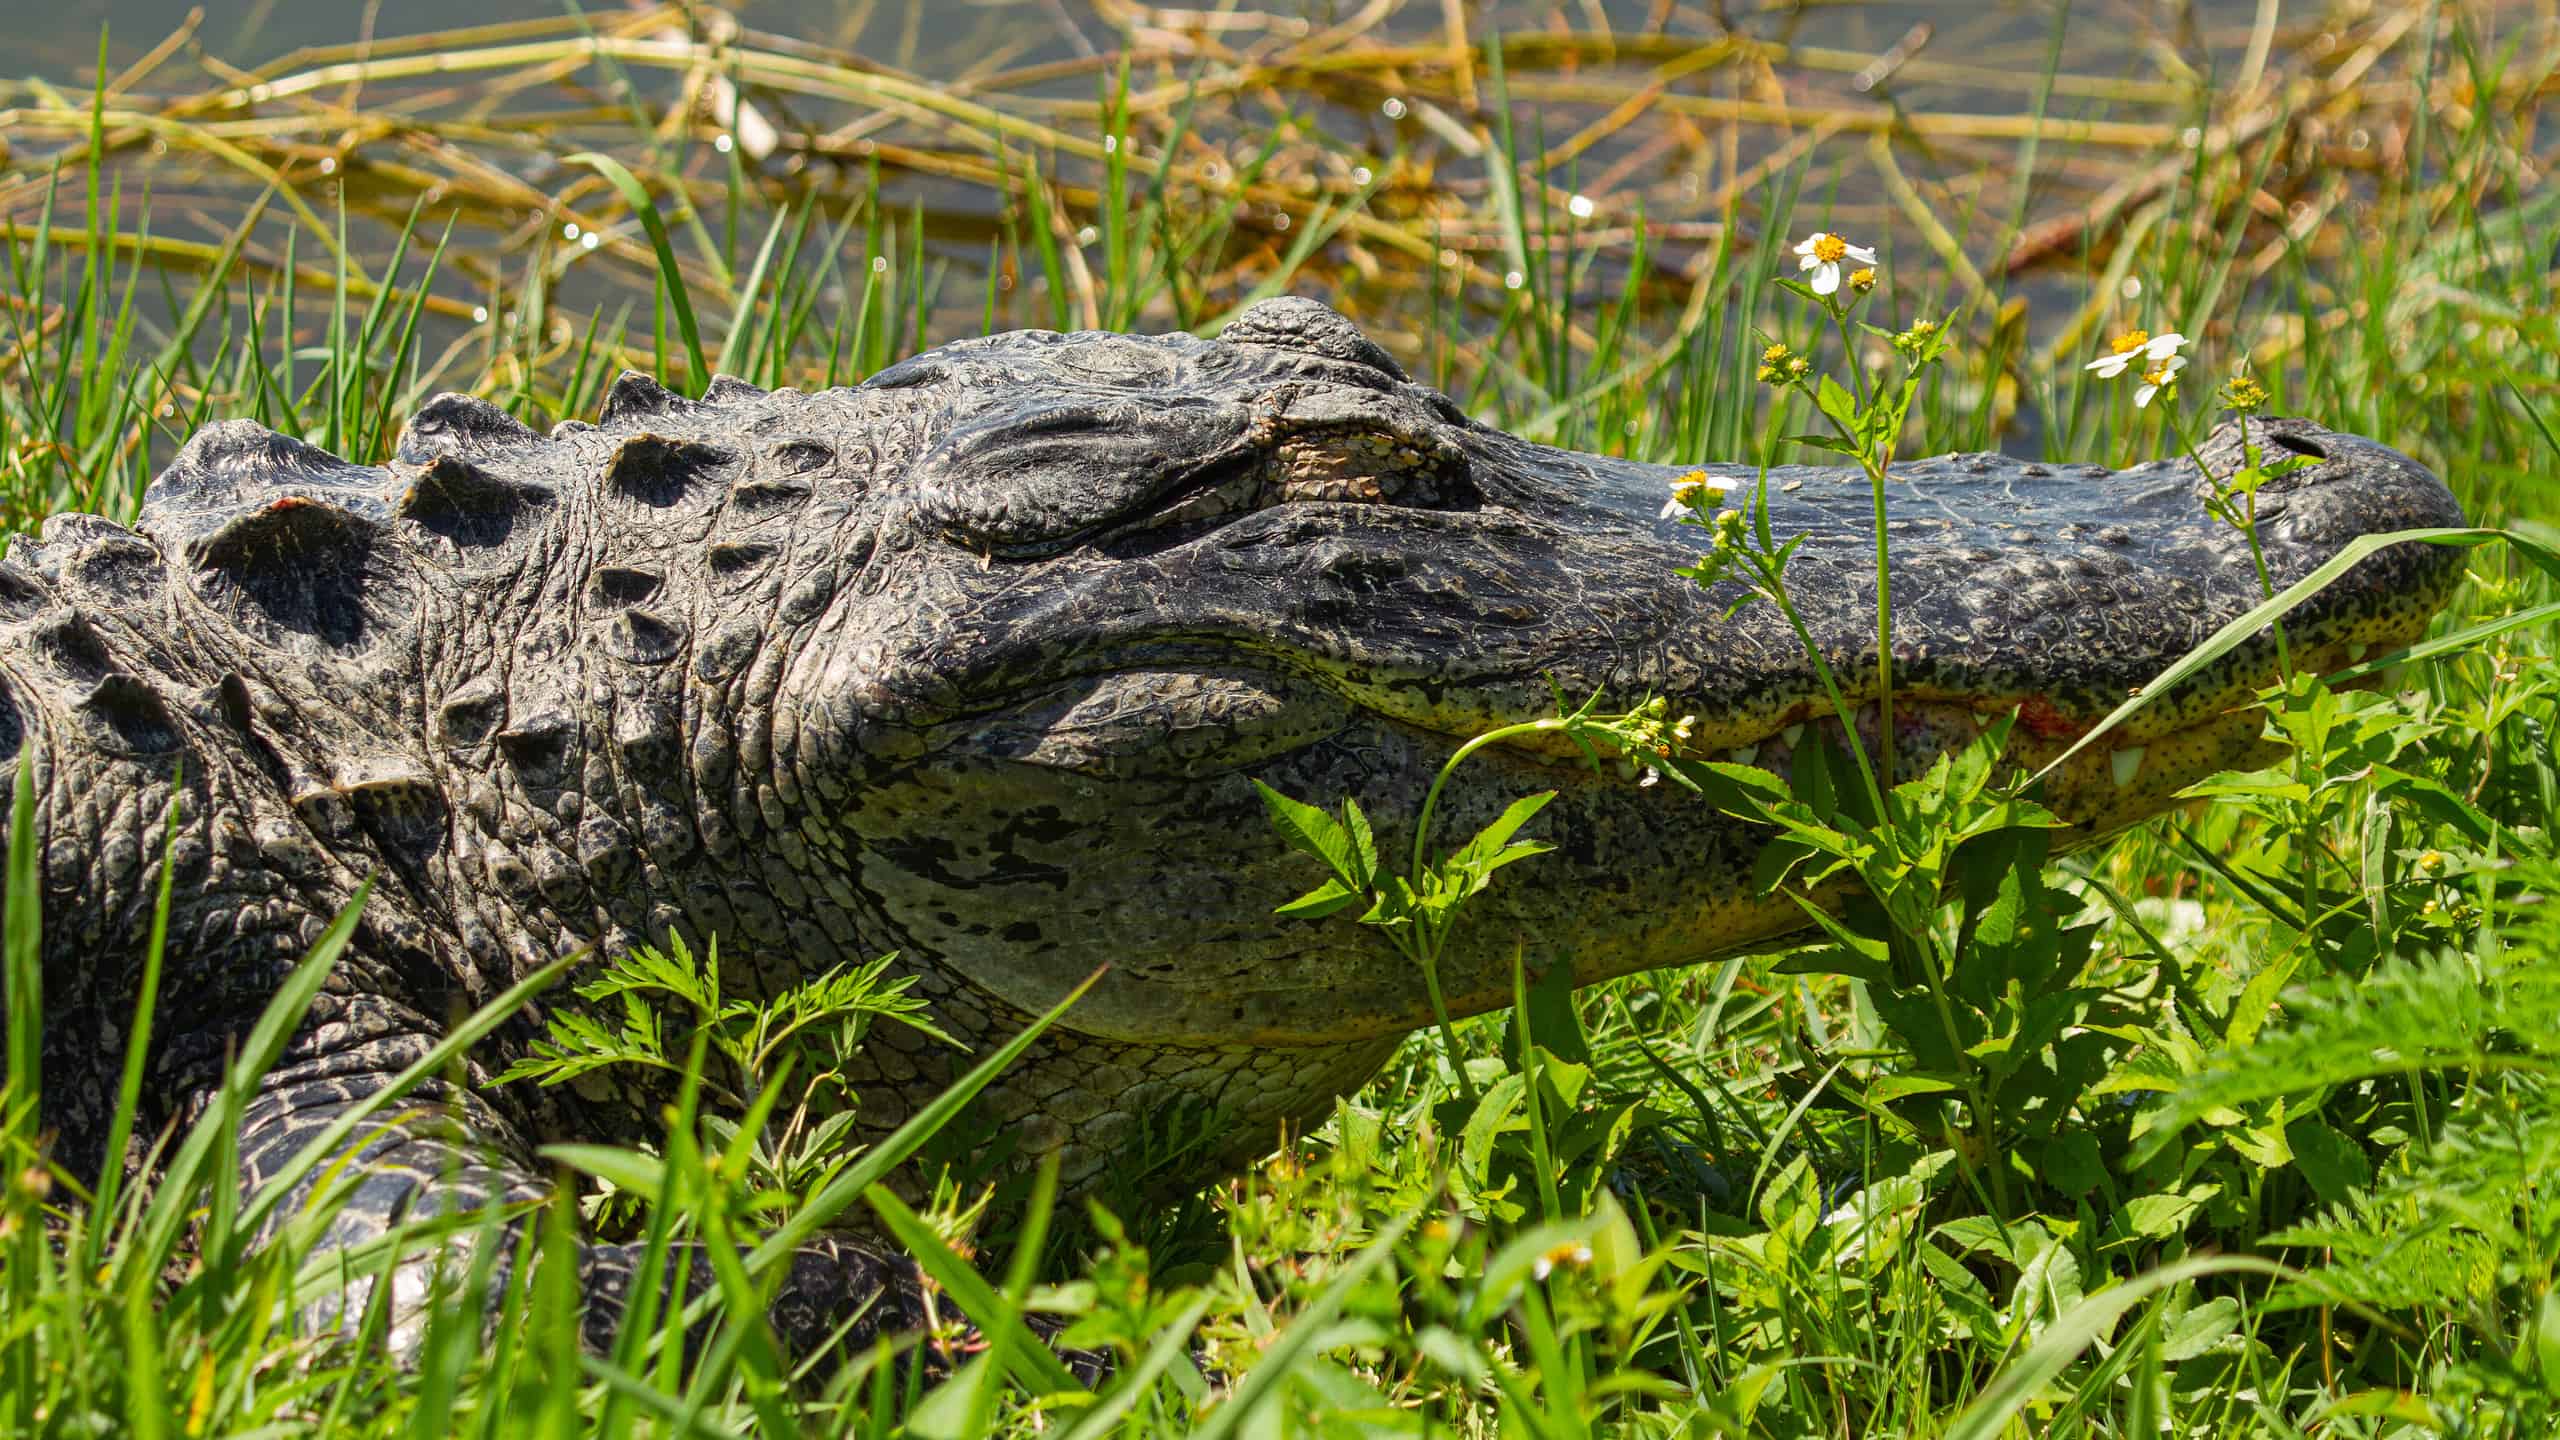 A closeup of an alligator's head, its eyes closed in a sleepy expression.